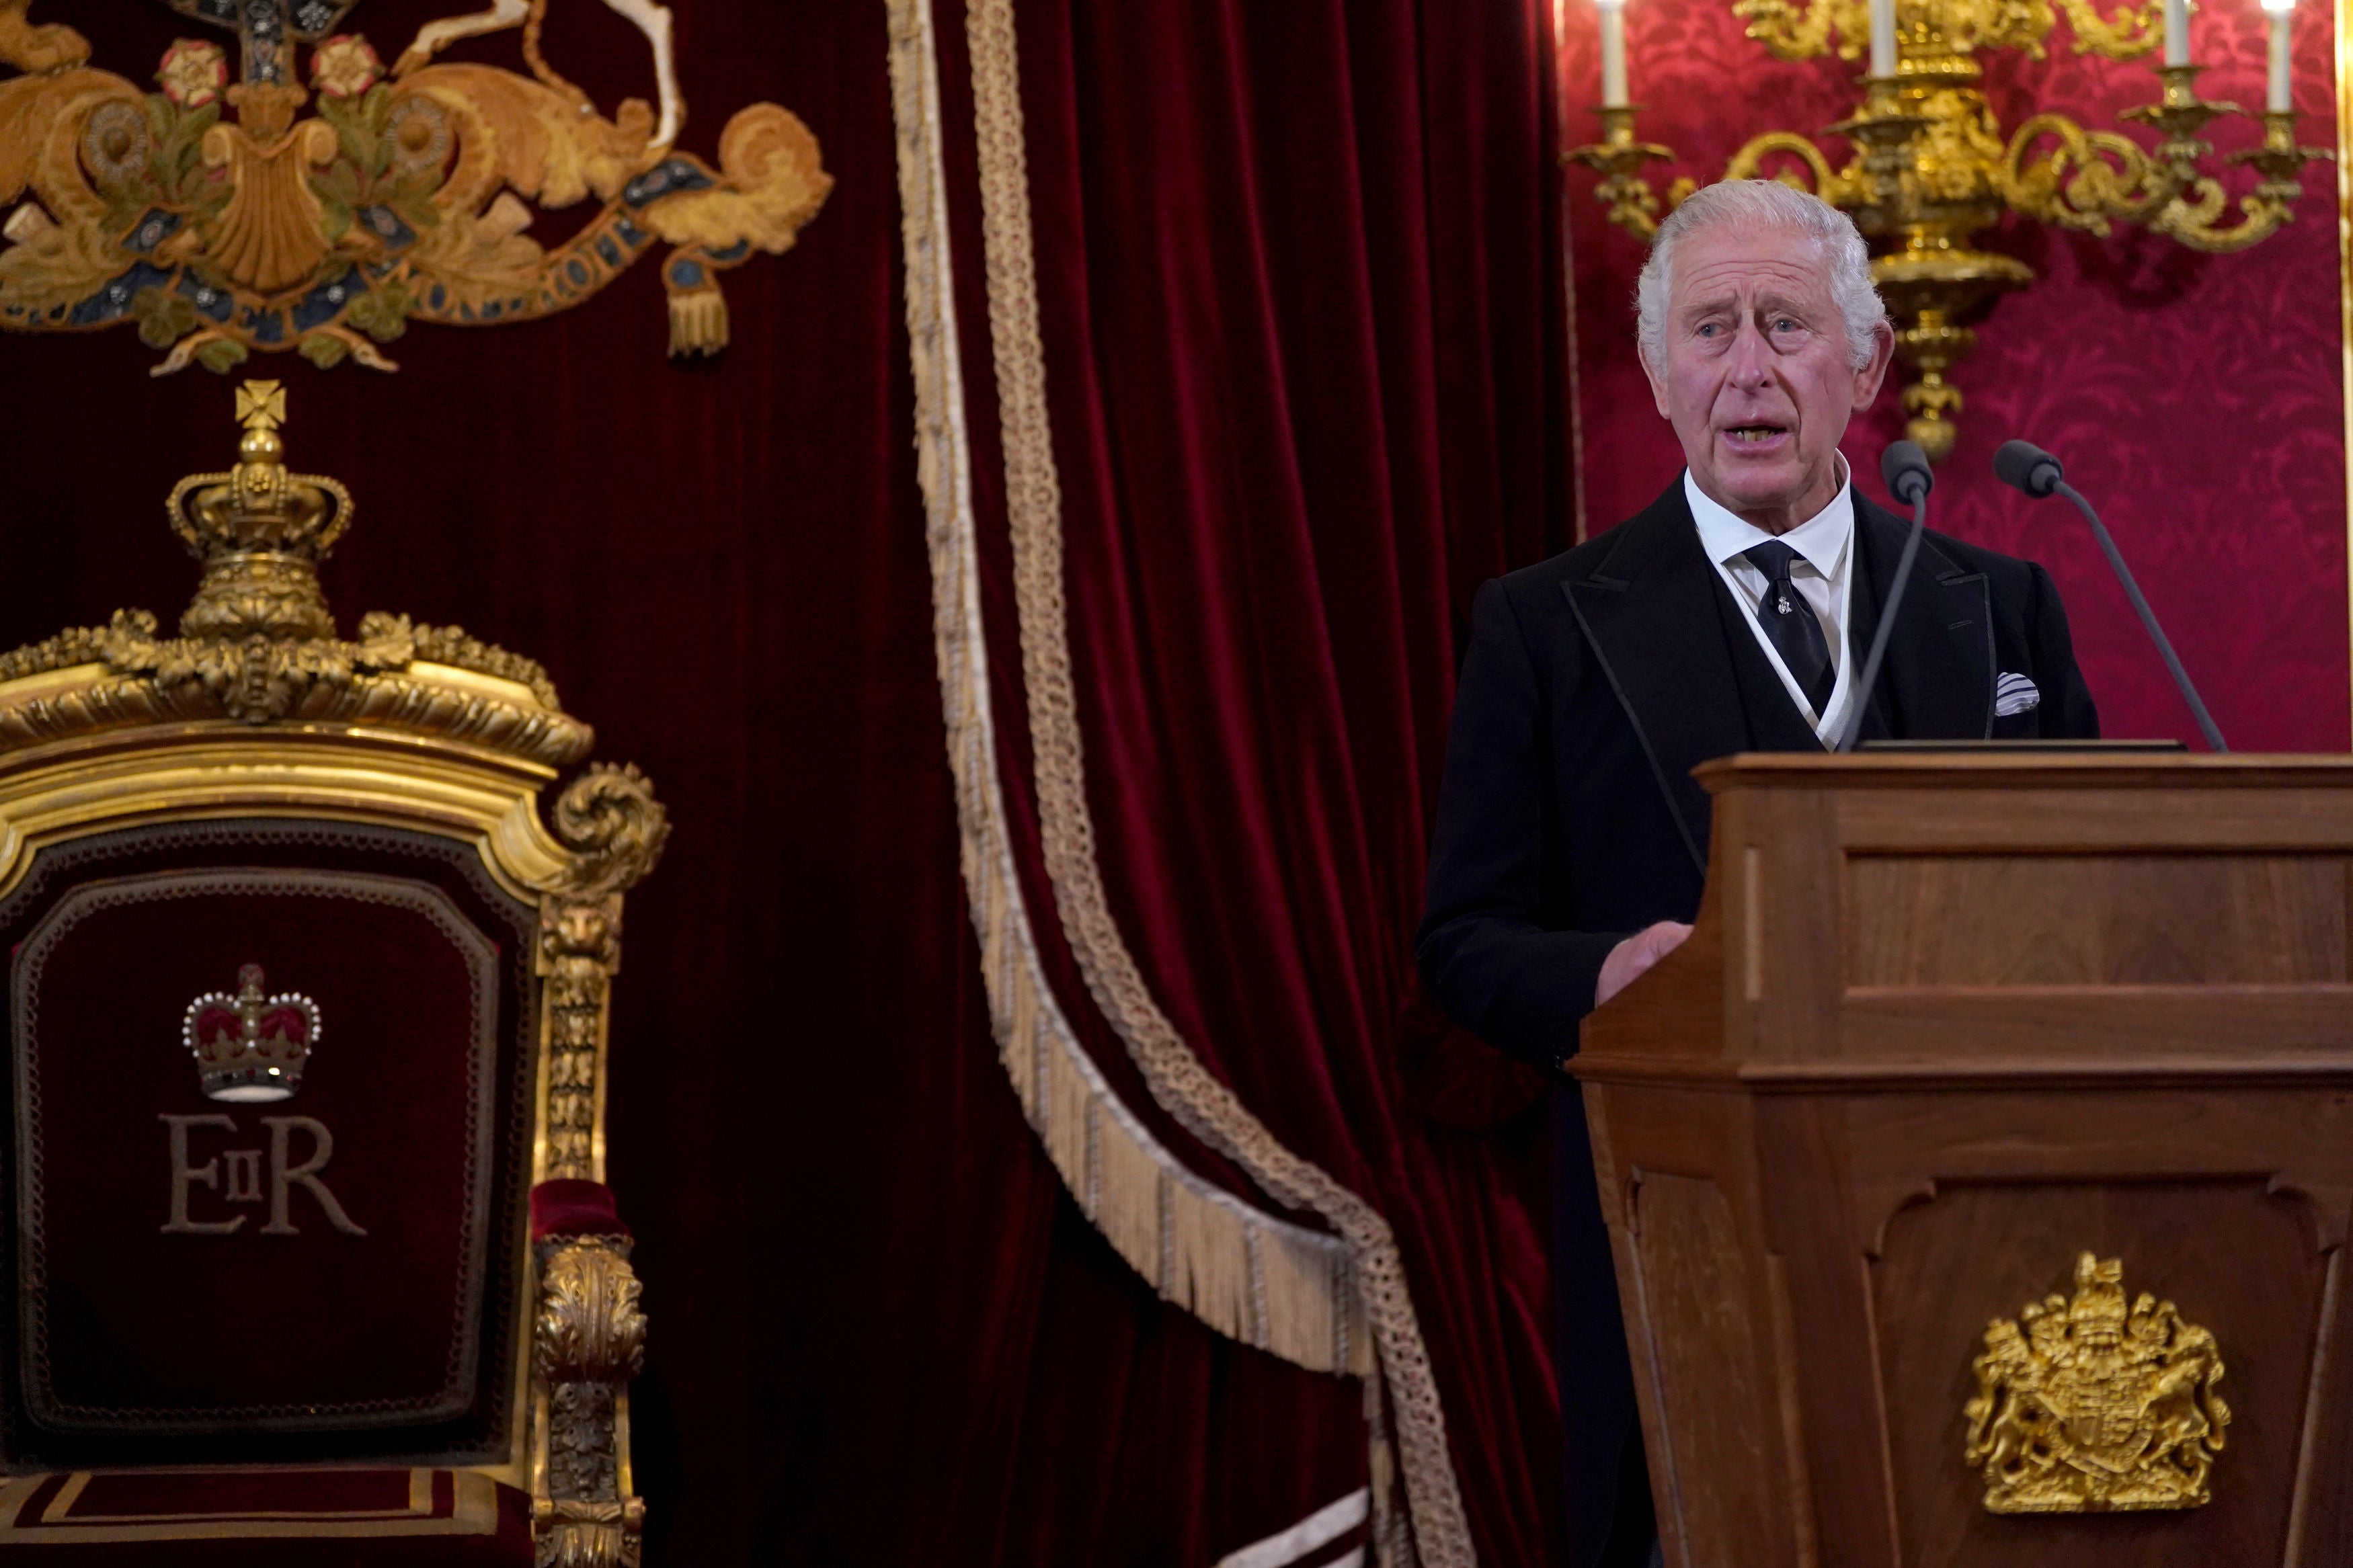 King Charles III during the Accession Council at St James’s Palace, London, where King Charles III is formally proclaimed monarch (Victoria Jones/PA)